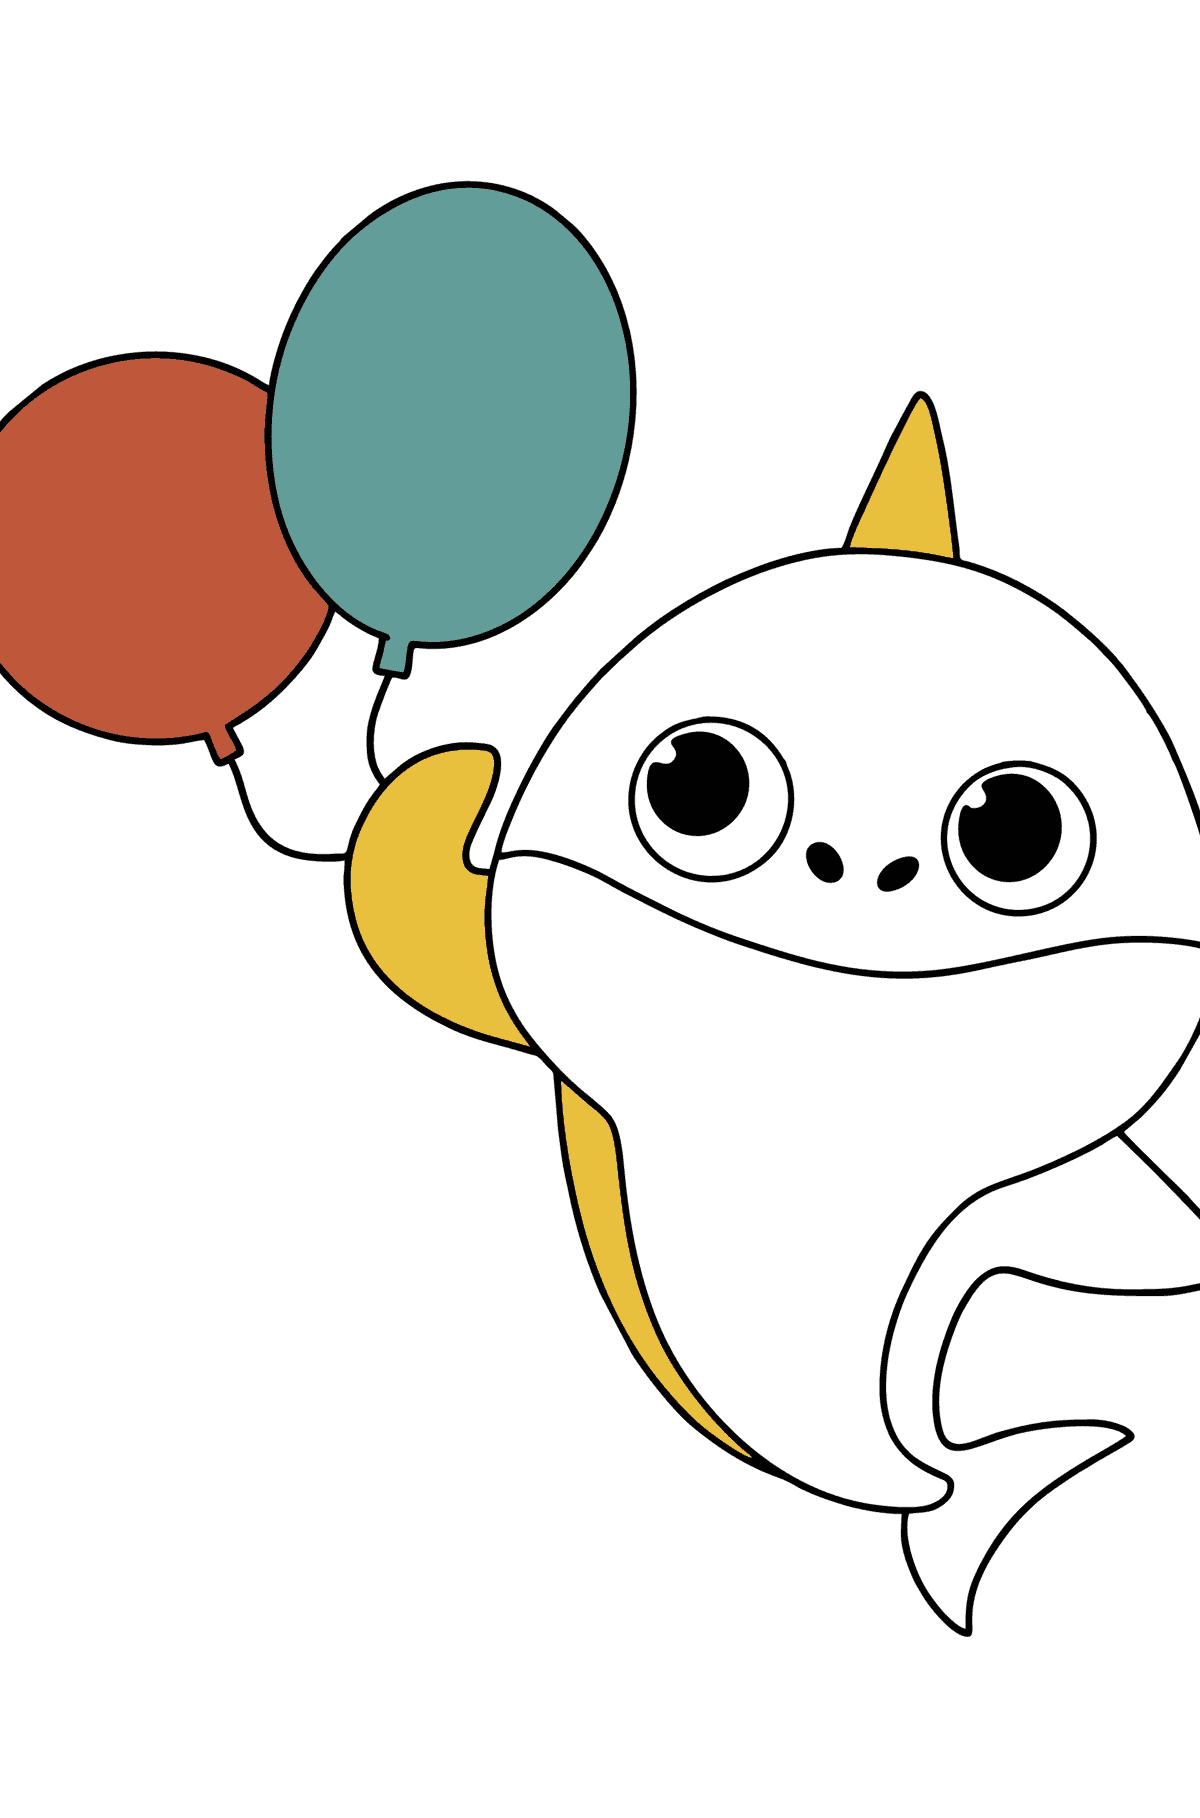 Baby shark coloring page - Coloring Pages for Kids